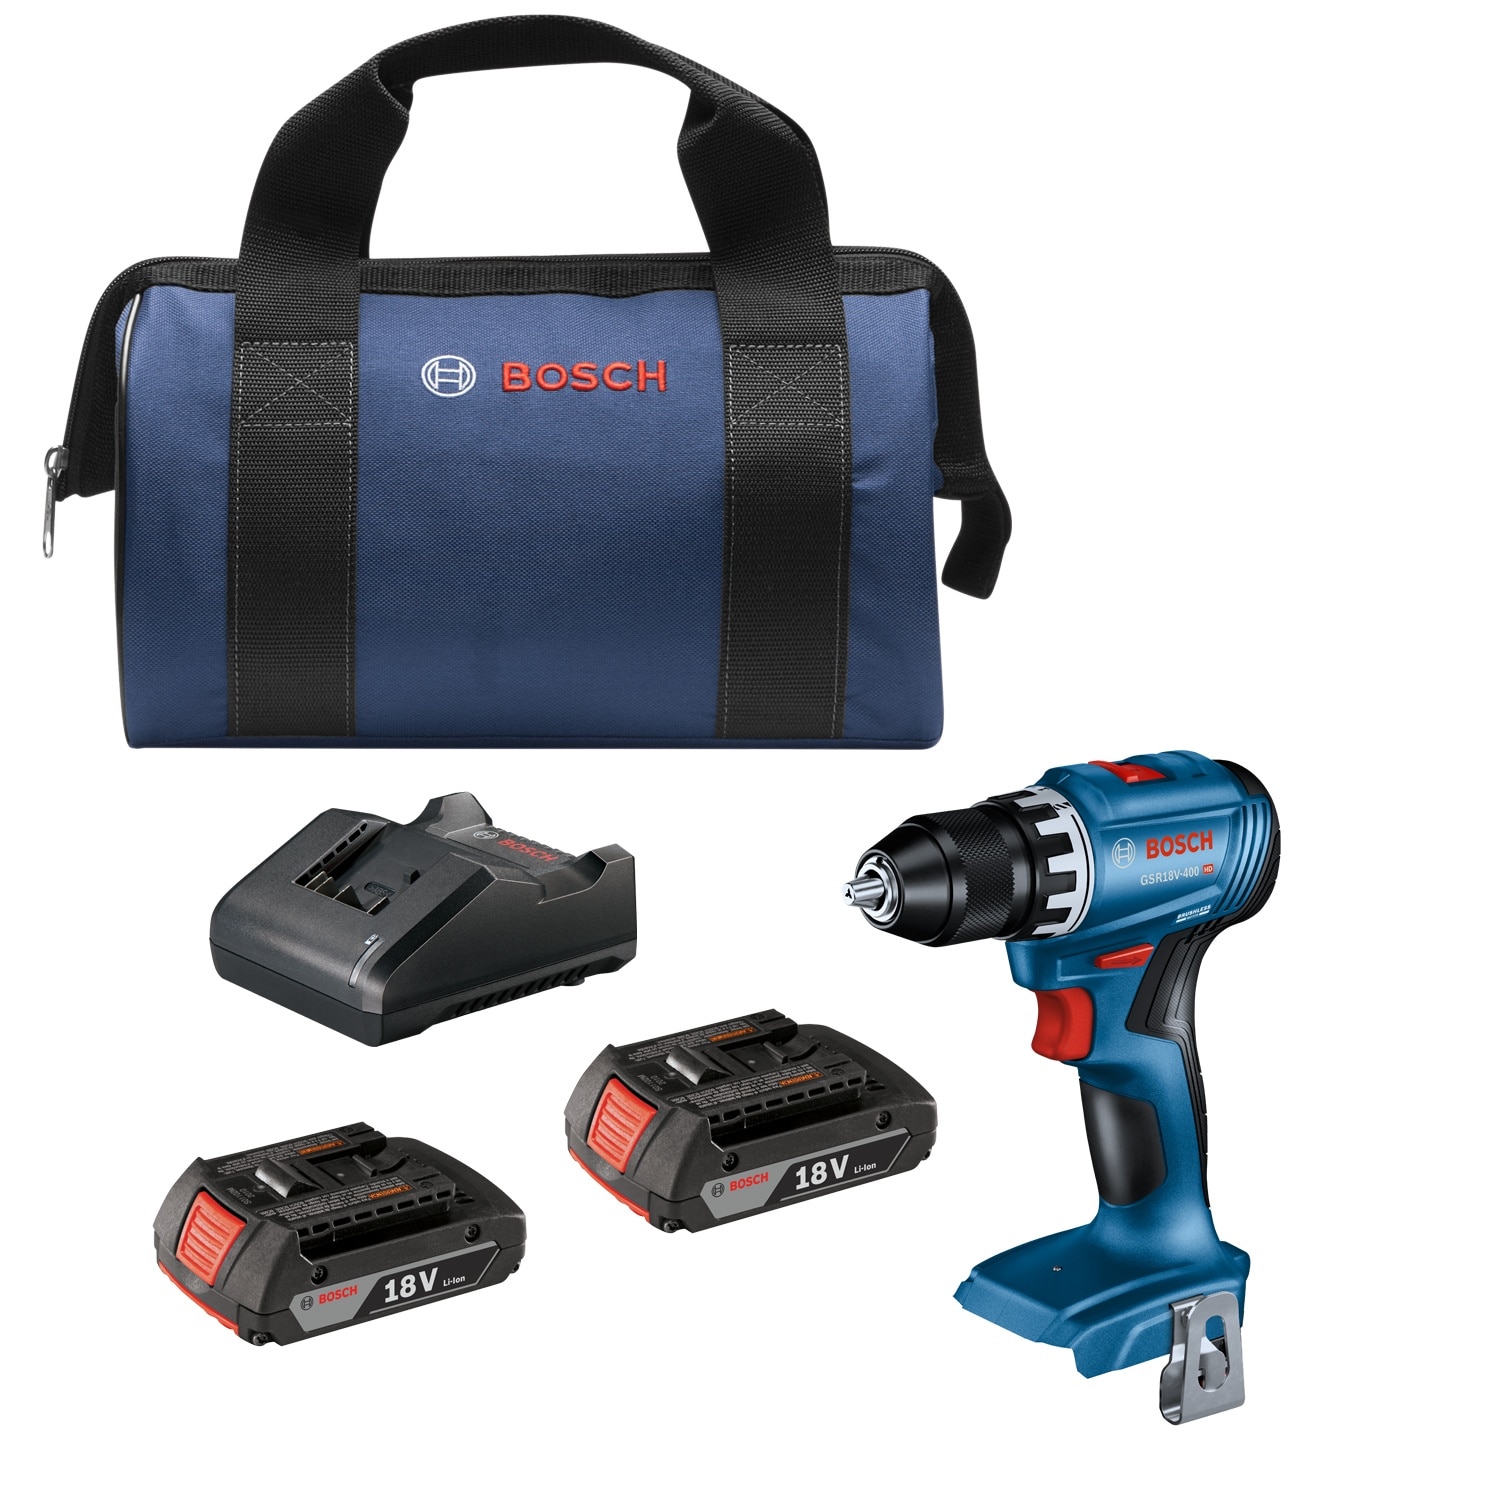 Cordless tools in a new performance dimension: First Biturbo drill drivers  from Bosch for pros - Bosch Media Service